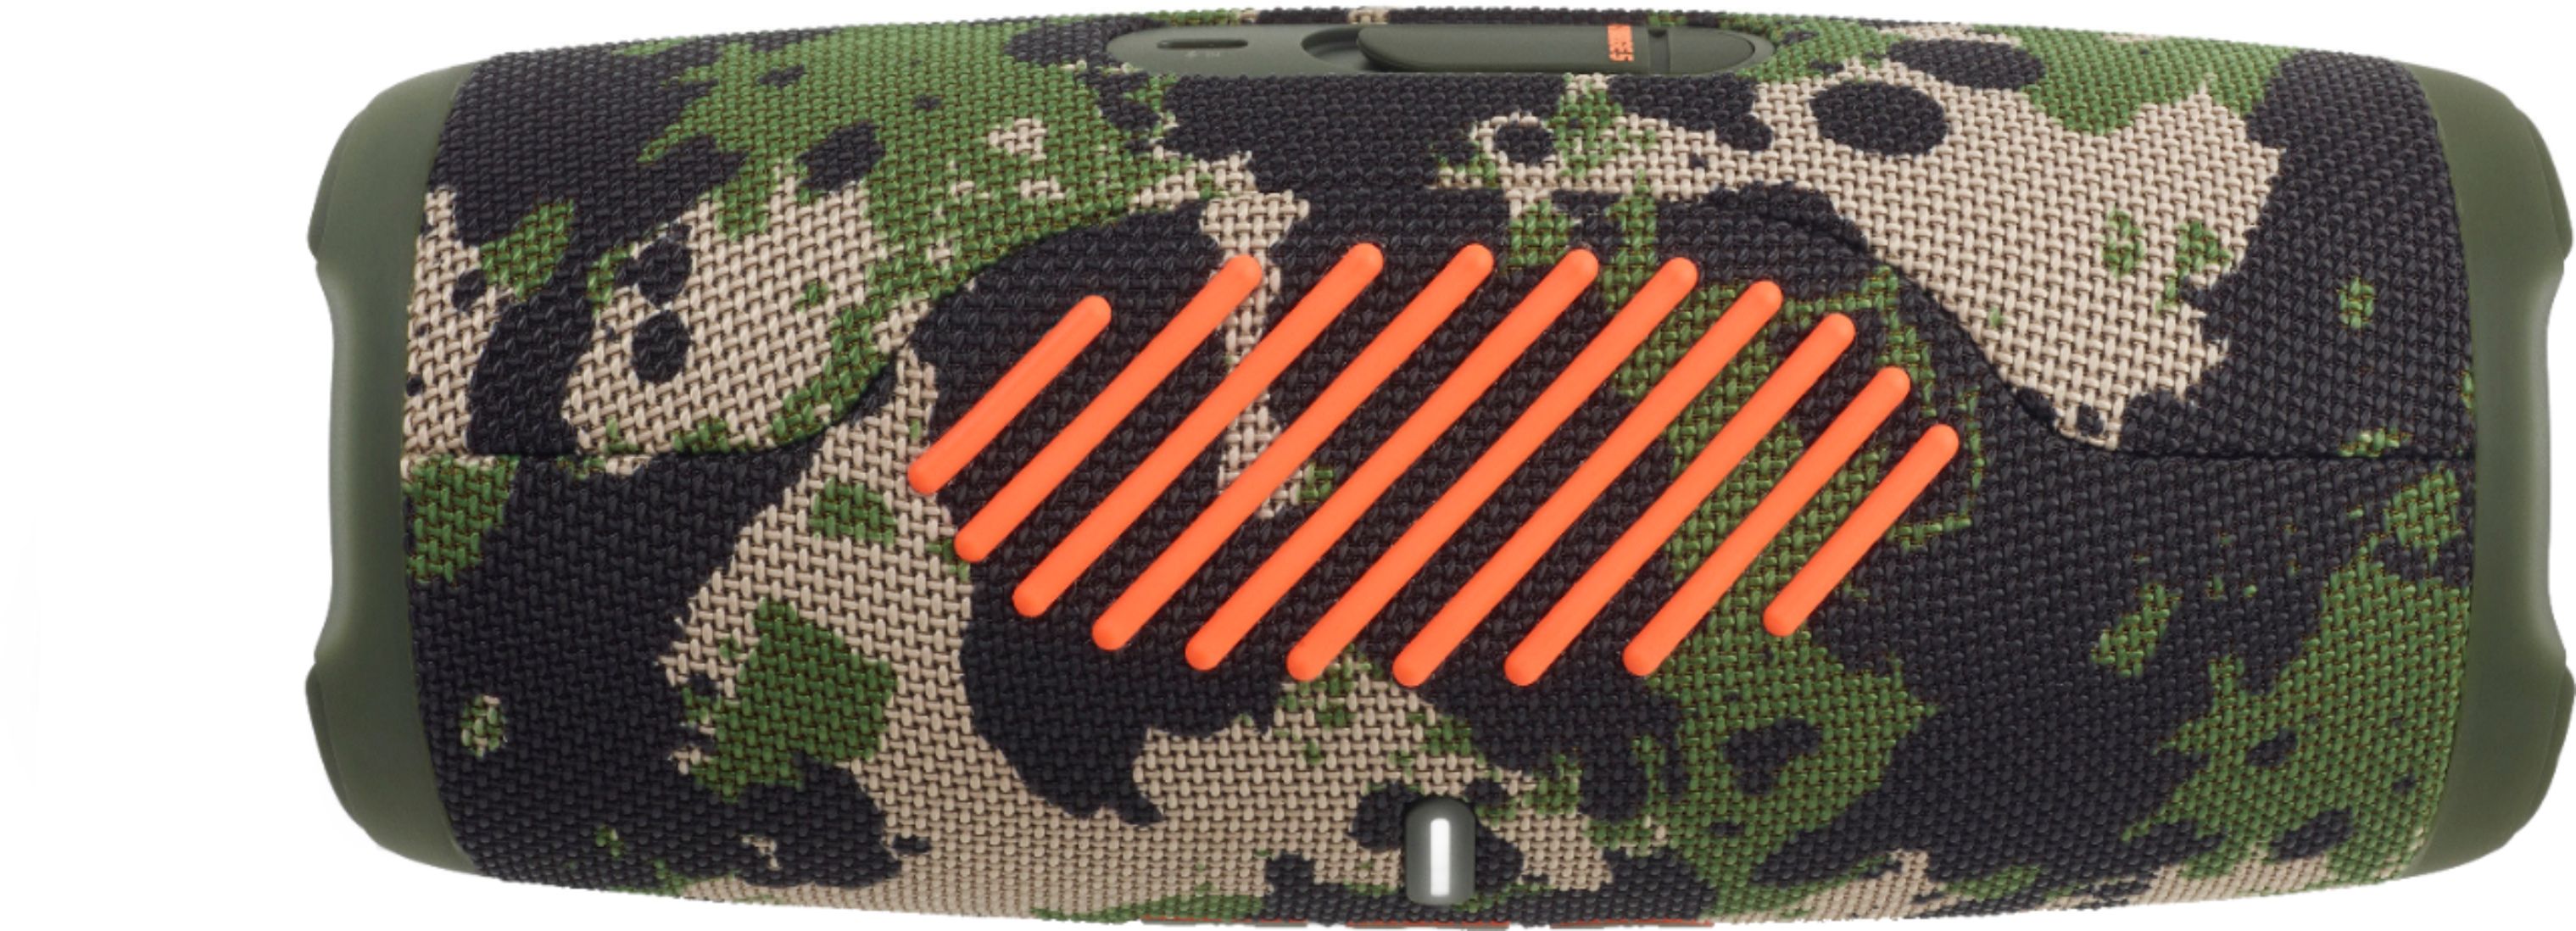 Best Buy: JBL Charge 4 Portable Bluetooth Speaker Camouflage